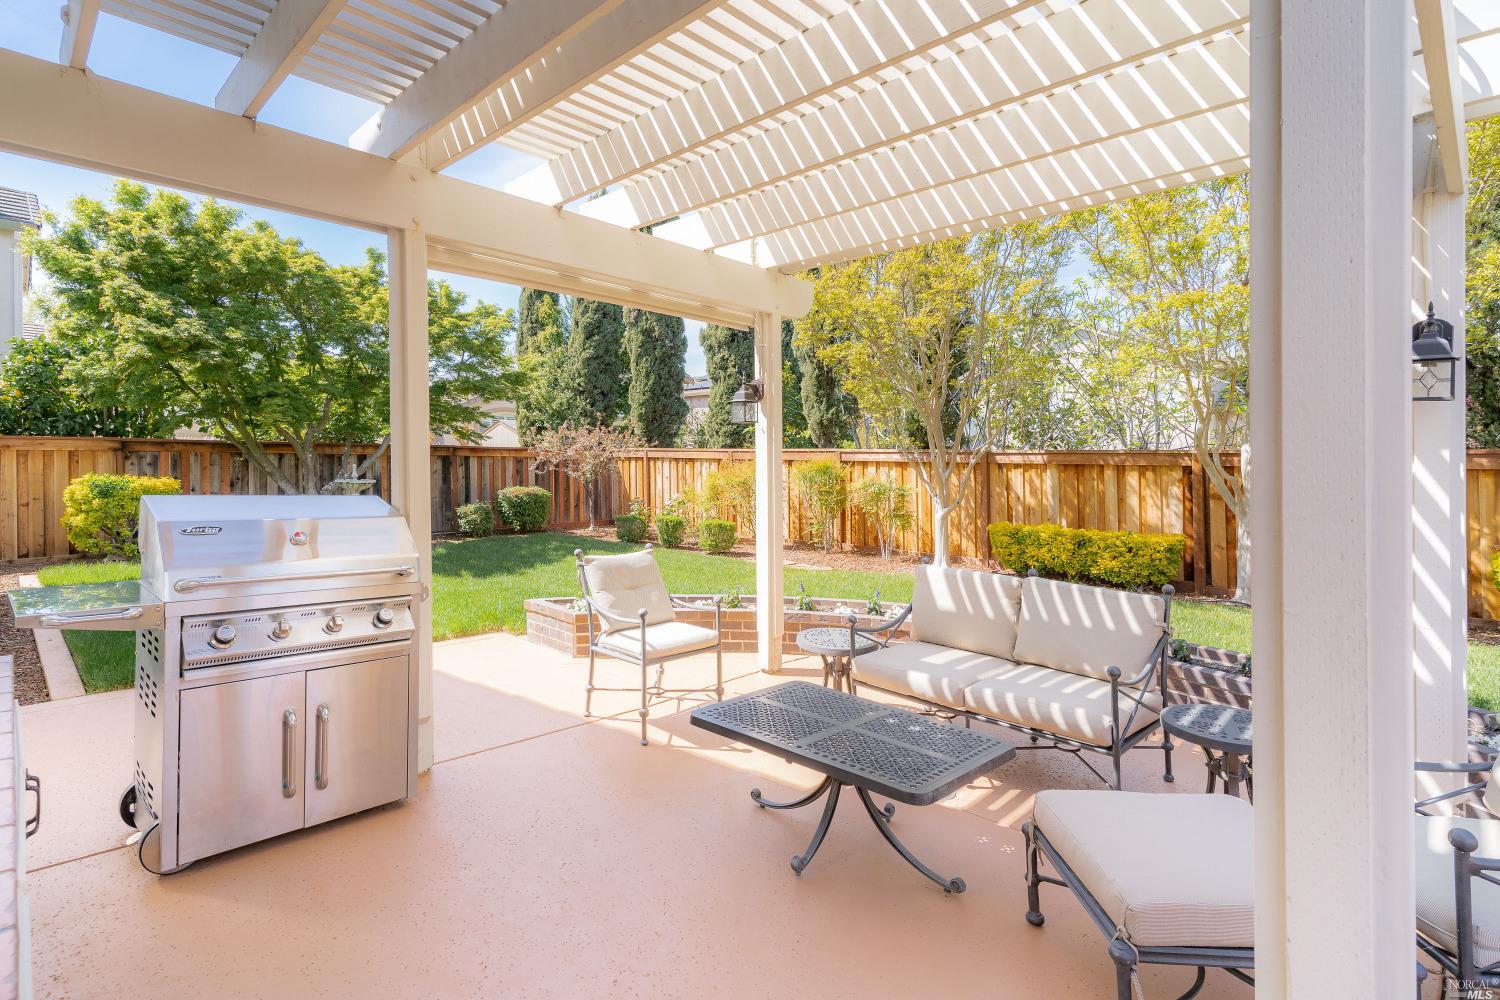 Patio furniture & BBQ included!